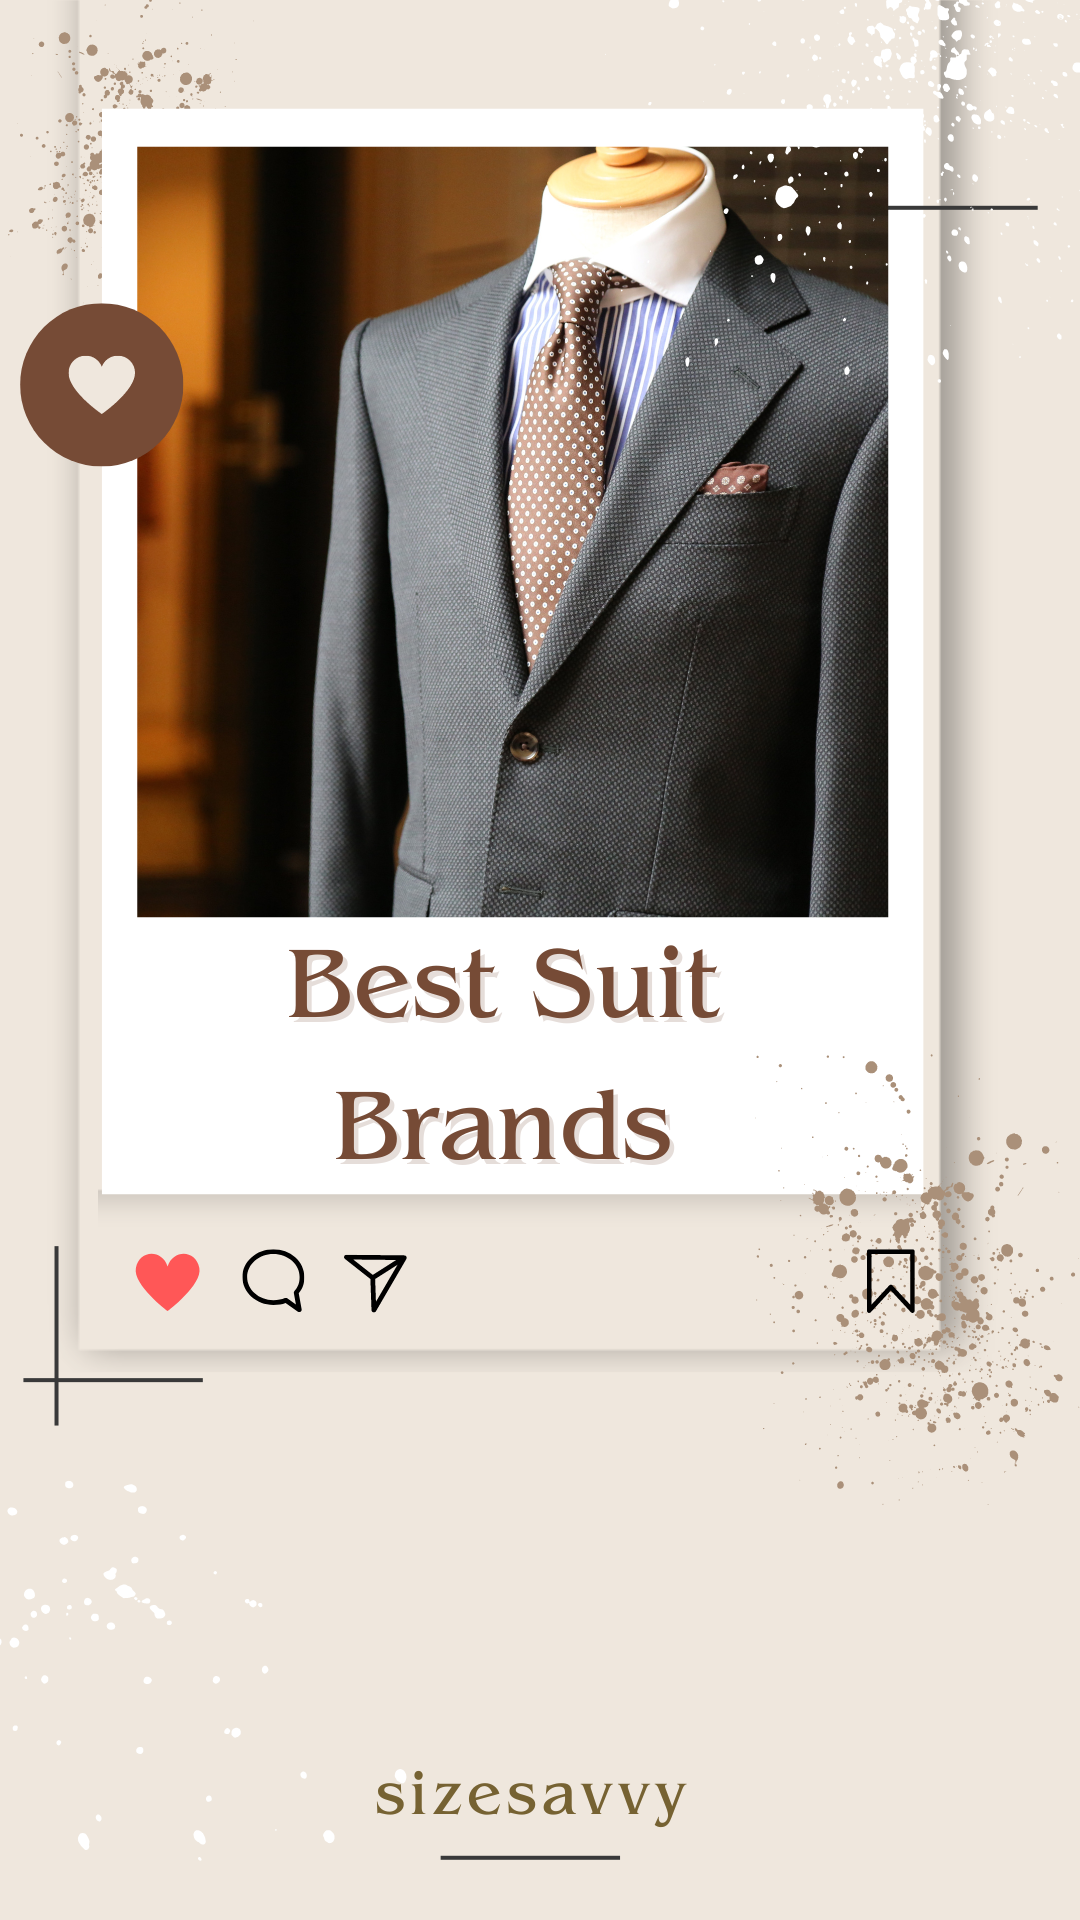 Top 10 Indian Suiting Brands and Its Brand Ambassadors